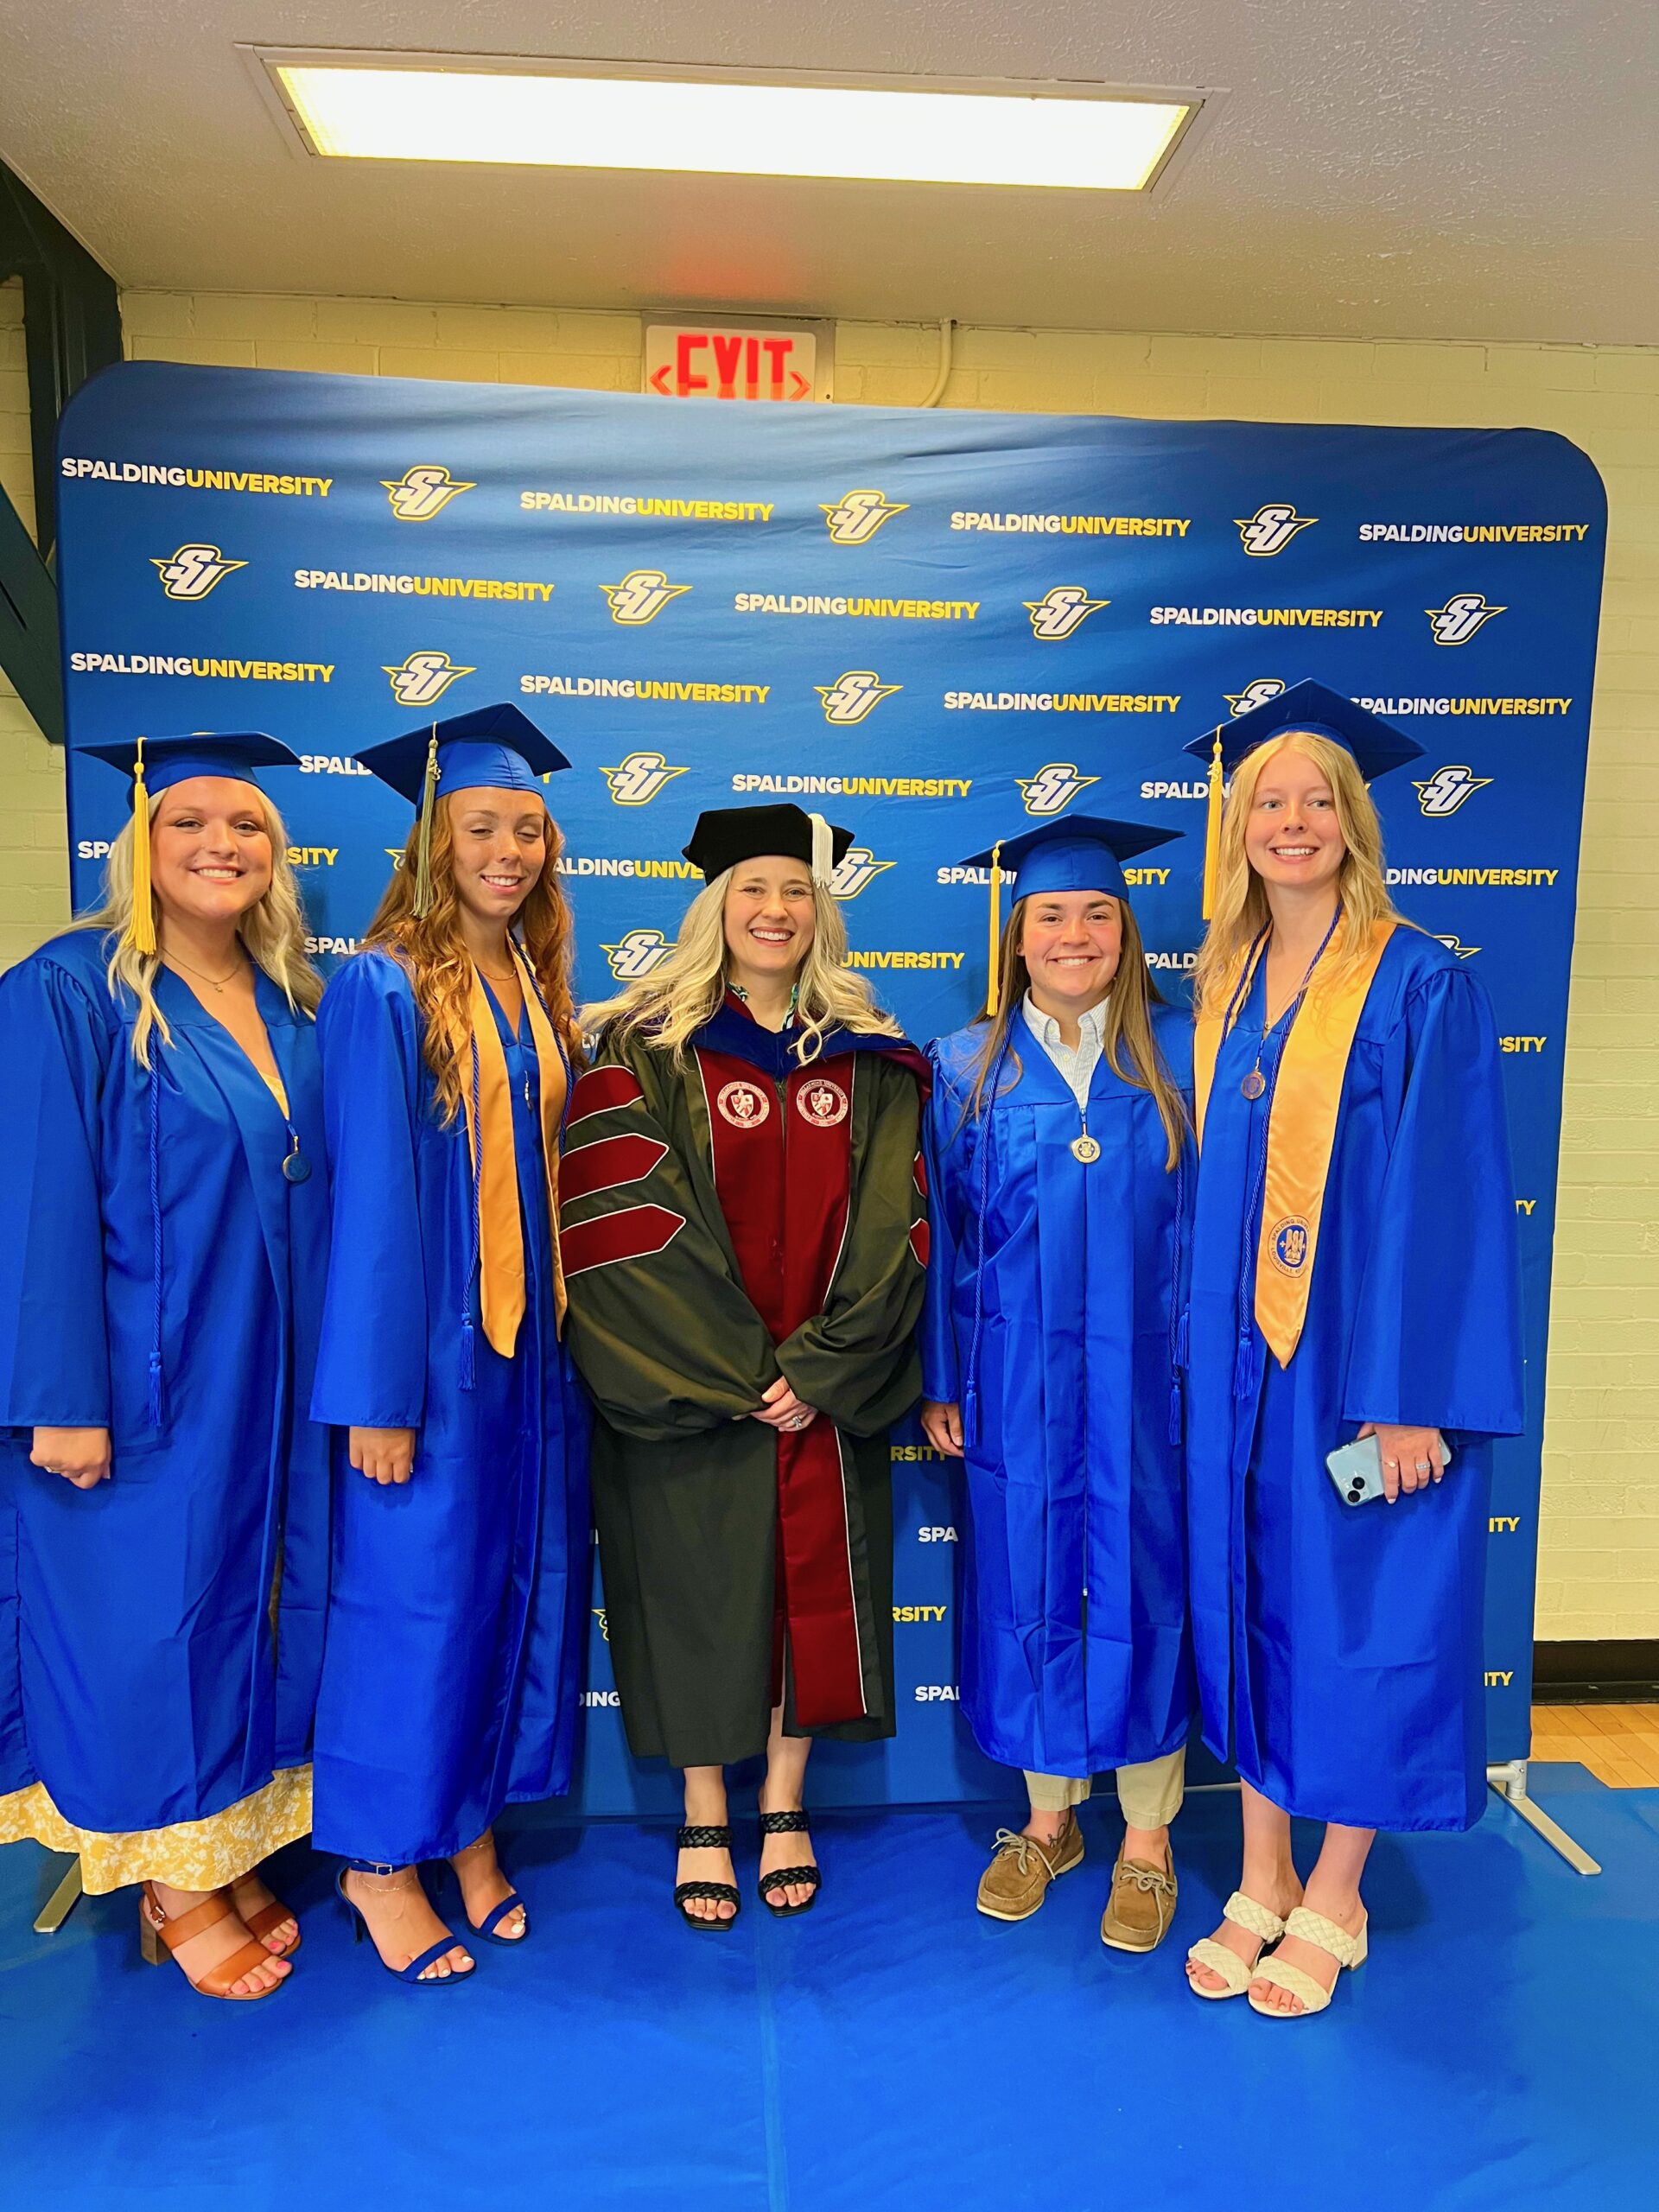 Spalding professor posing with group of bachelor's graduates in front of Spalding Athletics backdrop